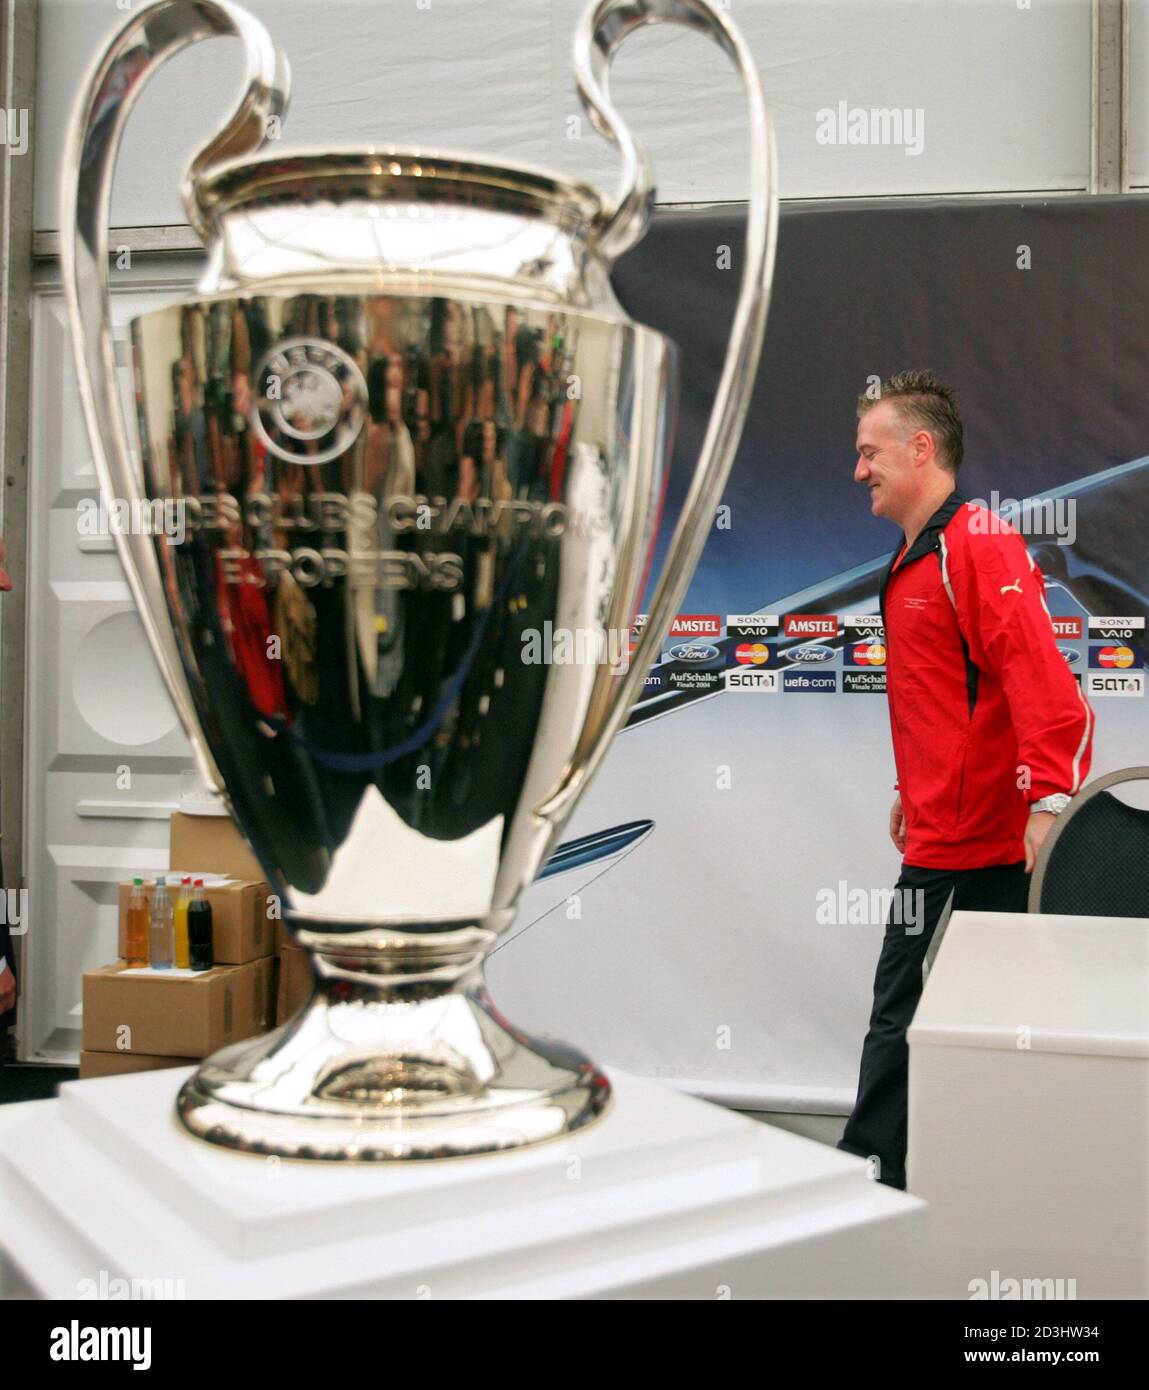 French coach of soccer team AS Monaco Didier Deschamps (R) passes behind  the UEFA Champions League trophy after a news conference at the Arena  stadium in Gelsenkirchen, May 25, 2004. AS Monaco